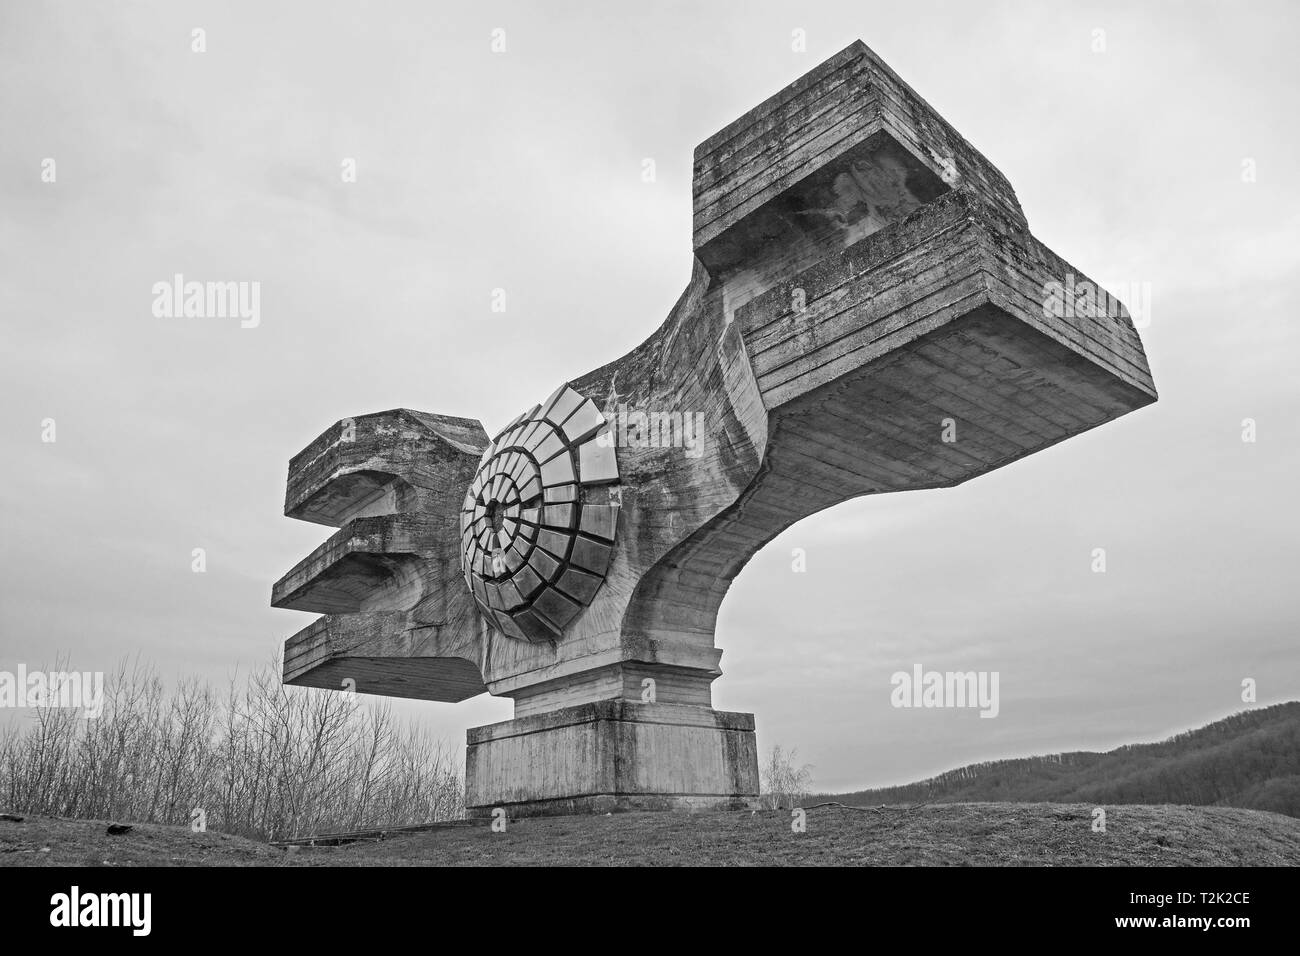 Podgaric, Croatia - December 30th 2018. The Monument to the Revolution of the People of Moslavina in Bjelovar-Bilogora County, central Croatia Stock Photo